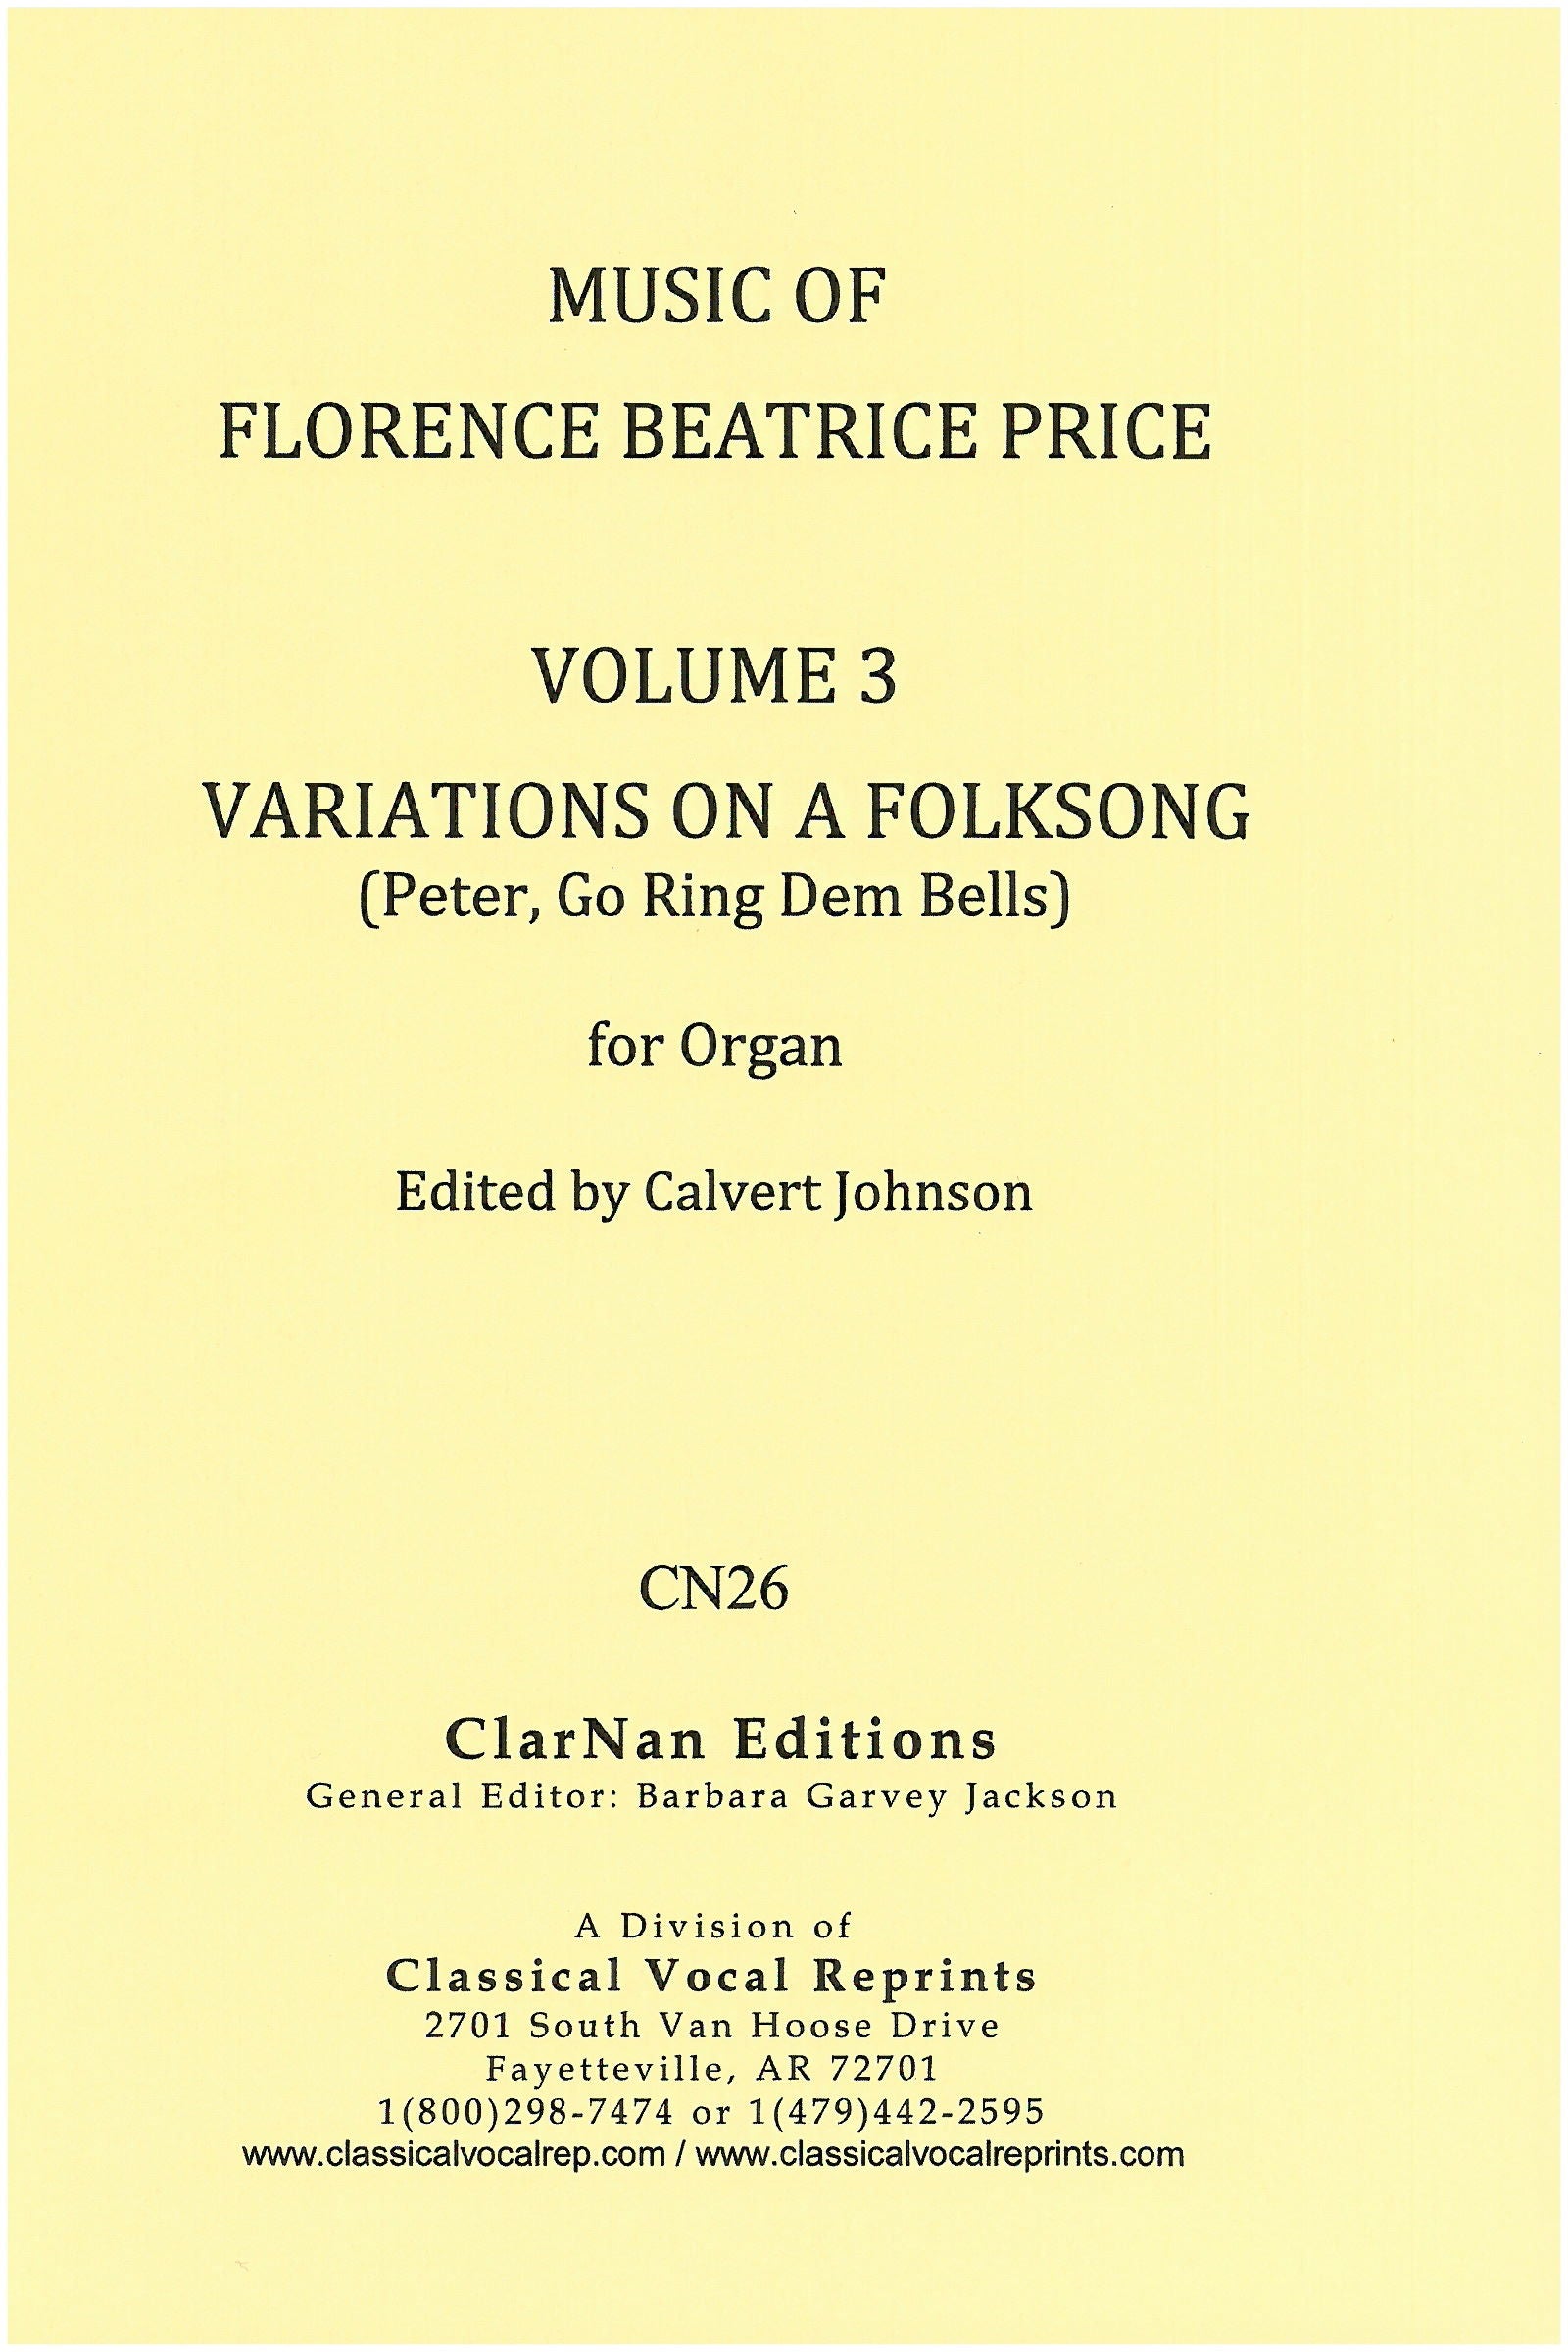 Price: Variations on a Folksong